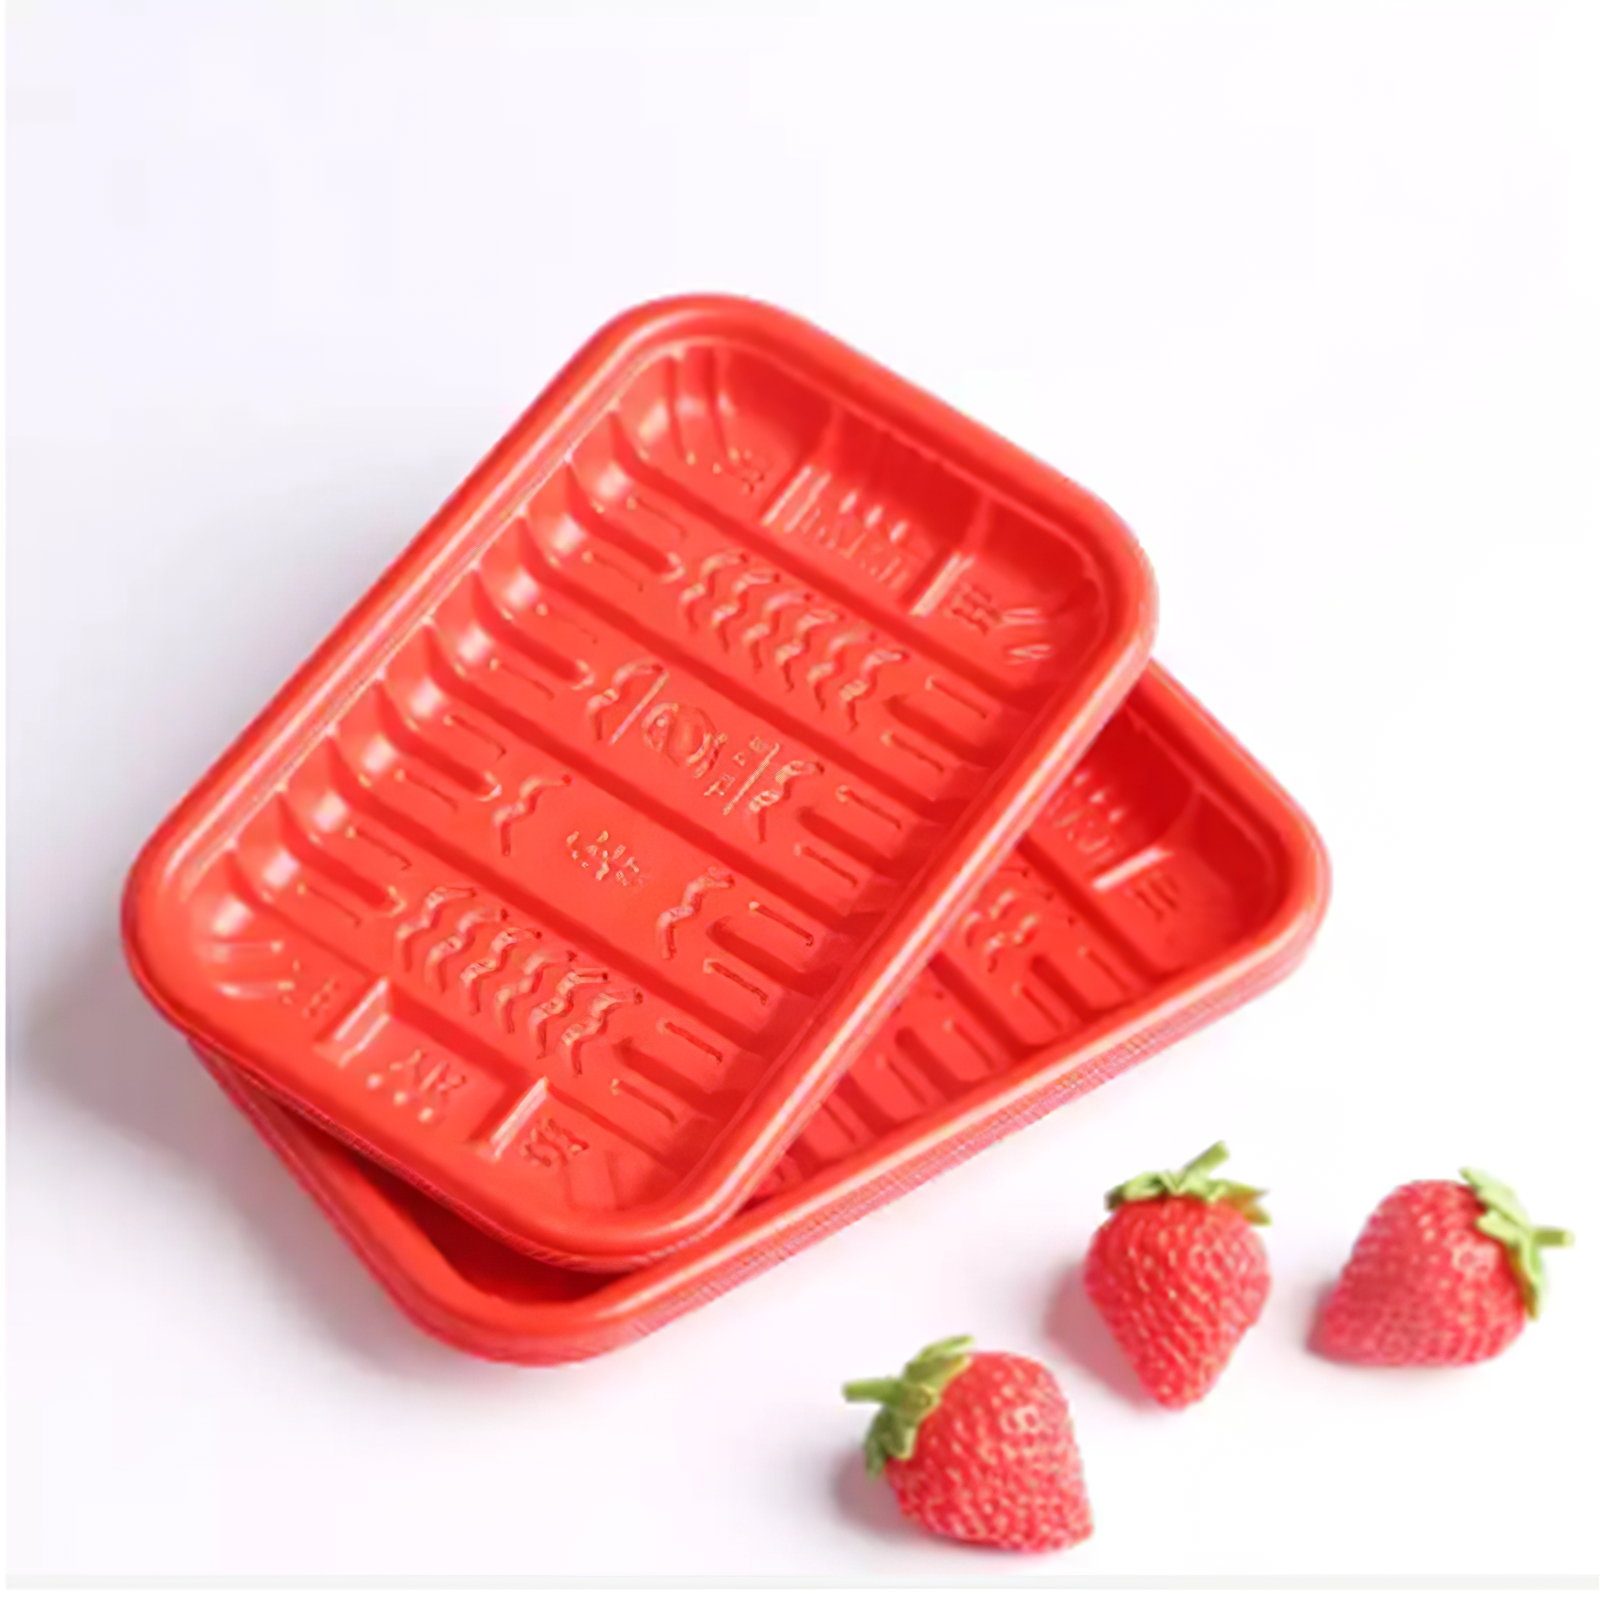 Strawberry Packaging Blister Clear Container Plastic Biodegradable Fruit Box